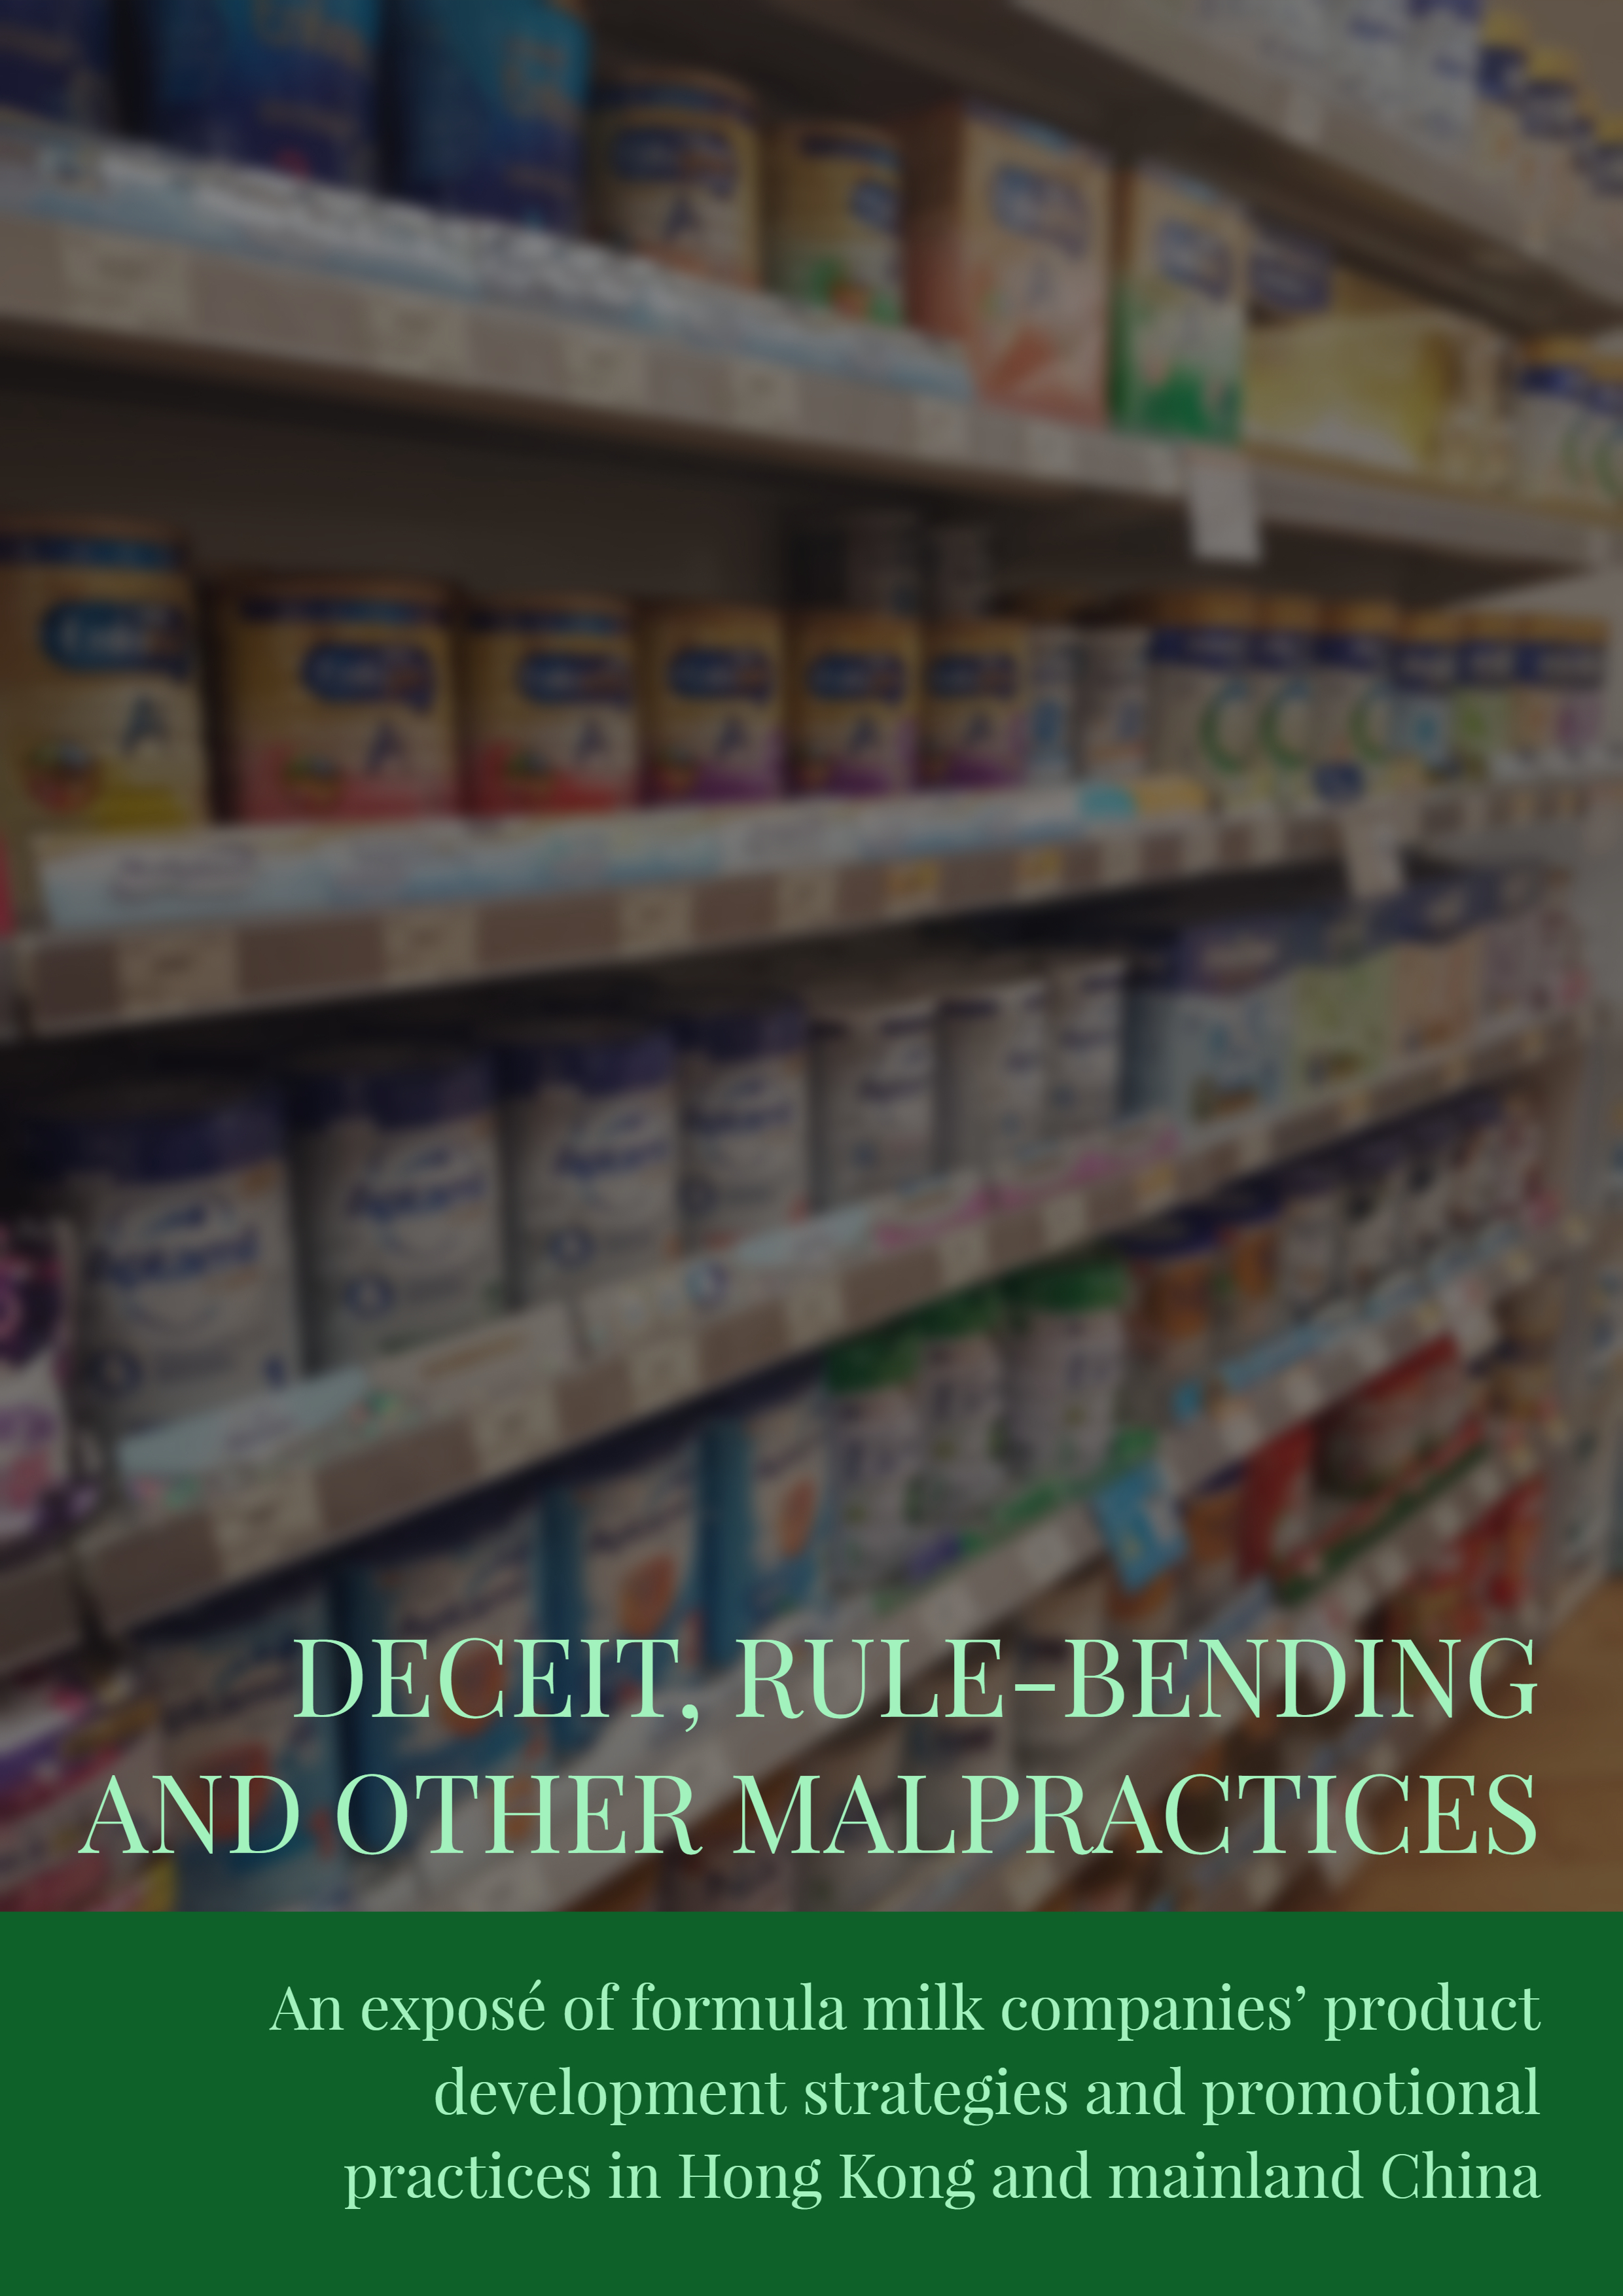 Deceit, Rule-bending, and other malpractices - An exposé of formula milk companies' product development strategies and promotional practices in Hong Kong and mainland China